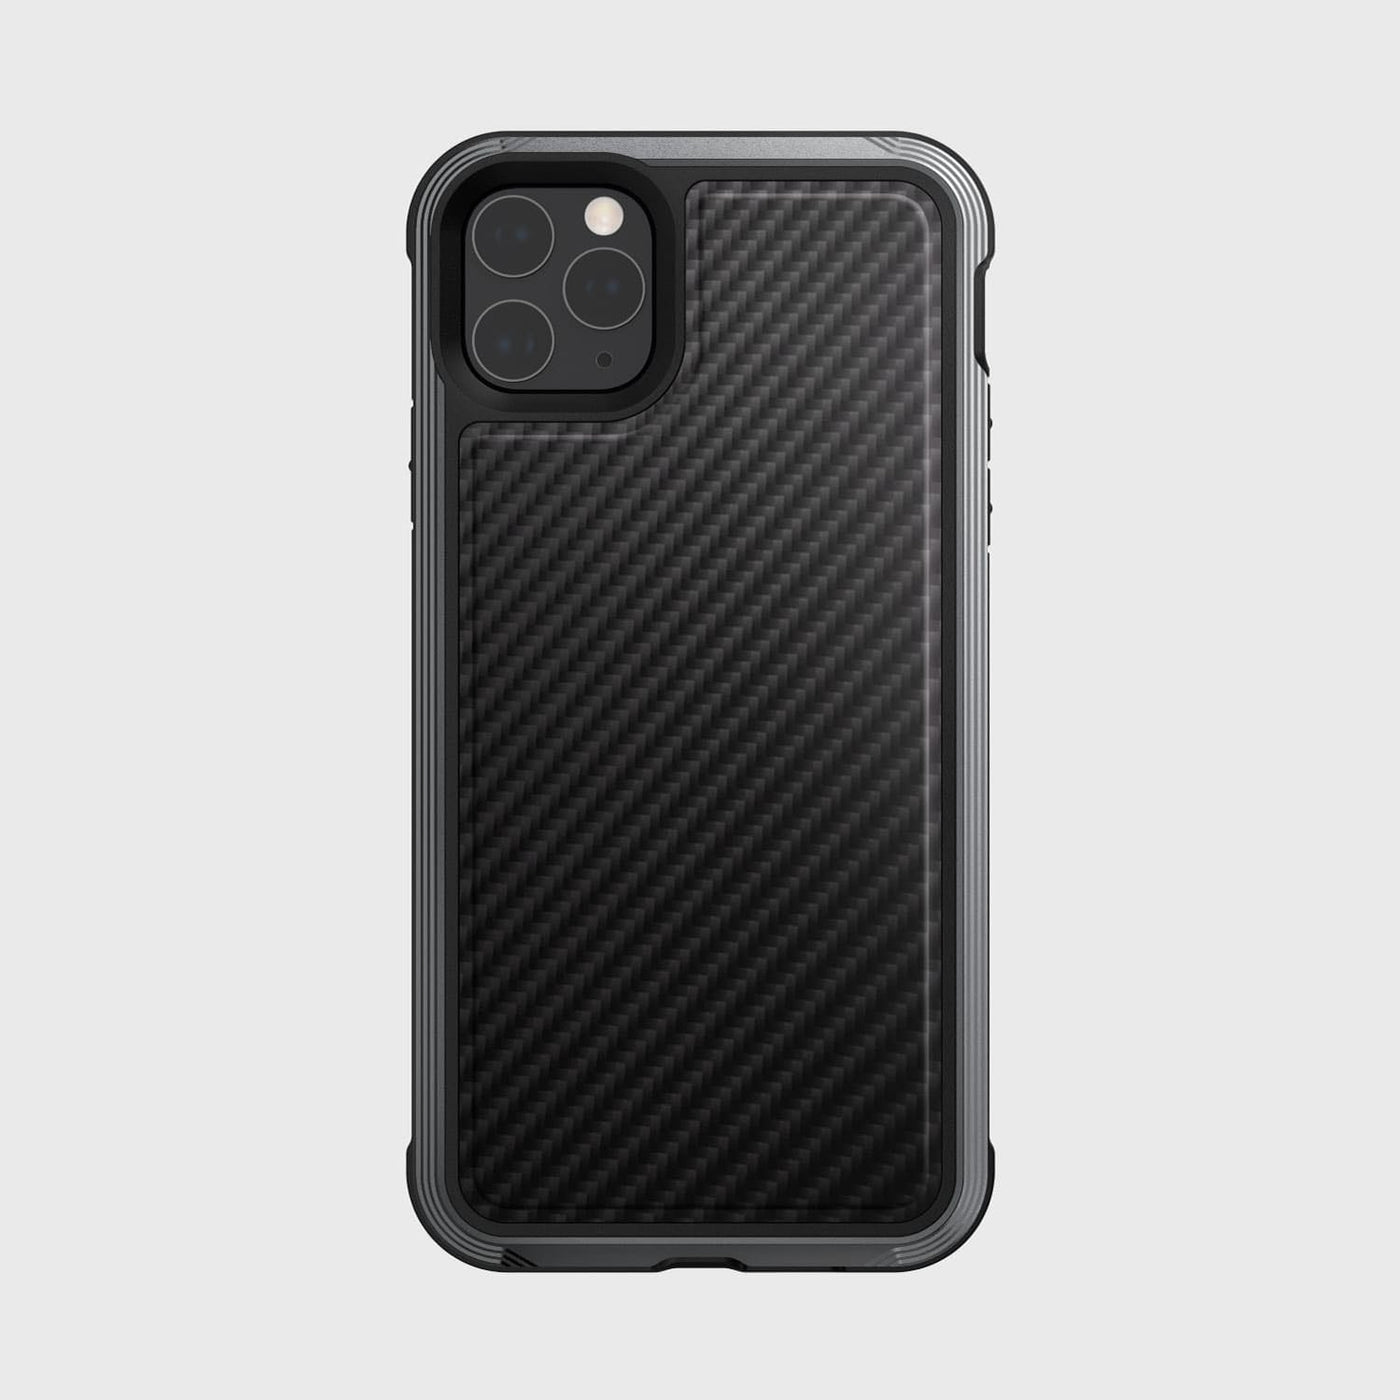 Luxurious Case for iPhone 11 Pro Max. Raptic Lux in black carbon fiber.